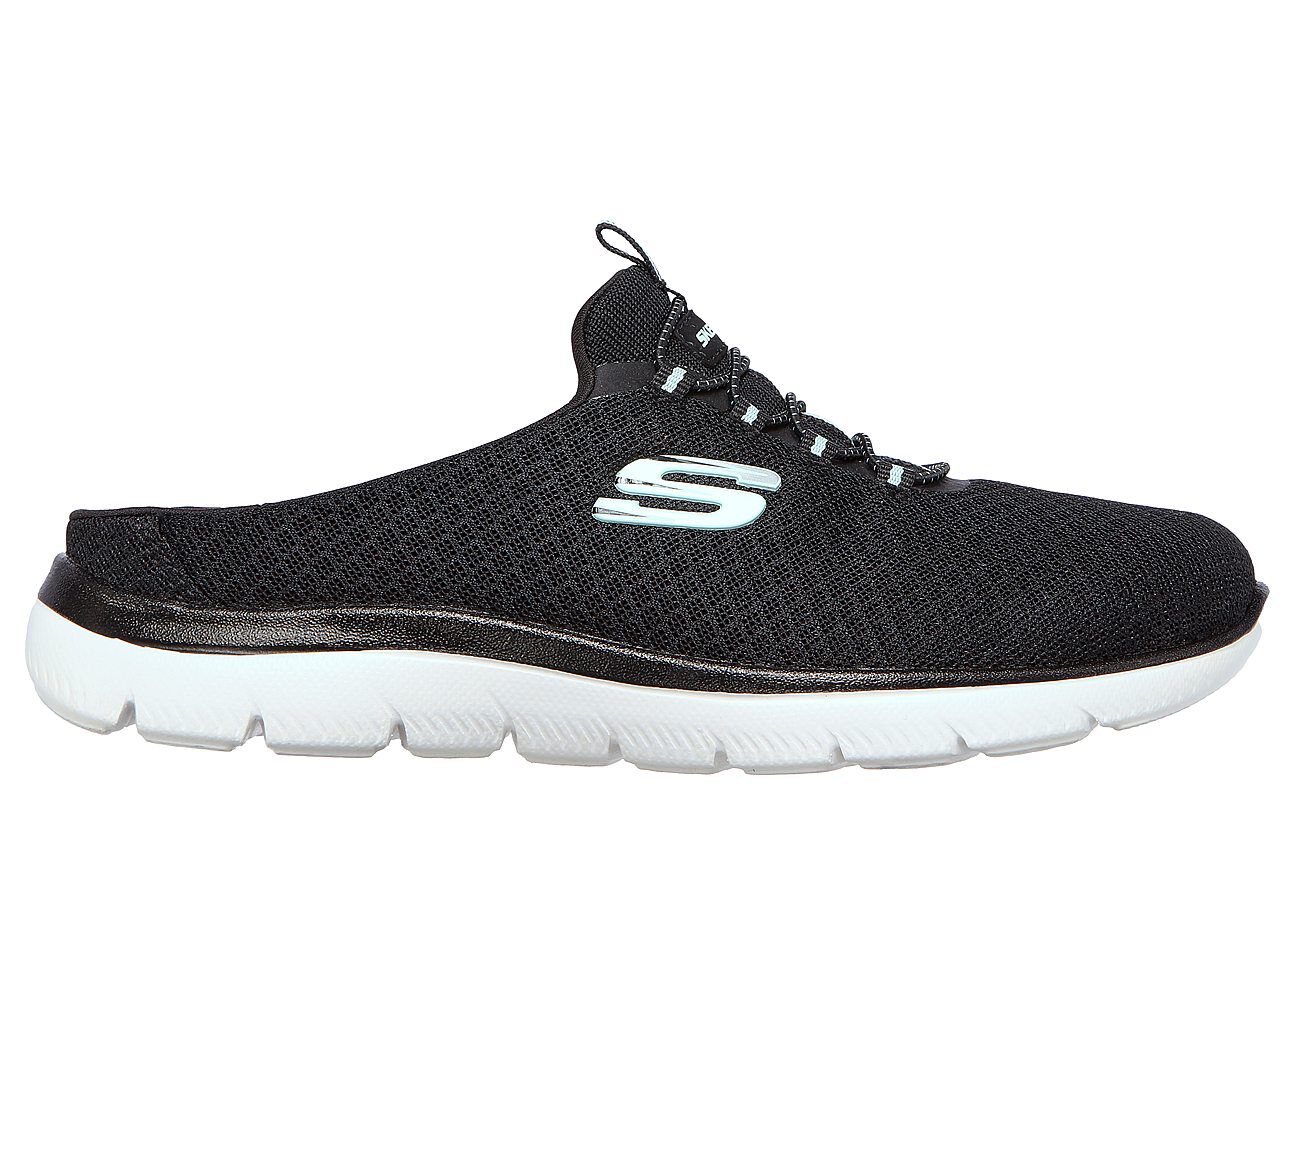 skechers air cooled price